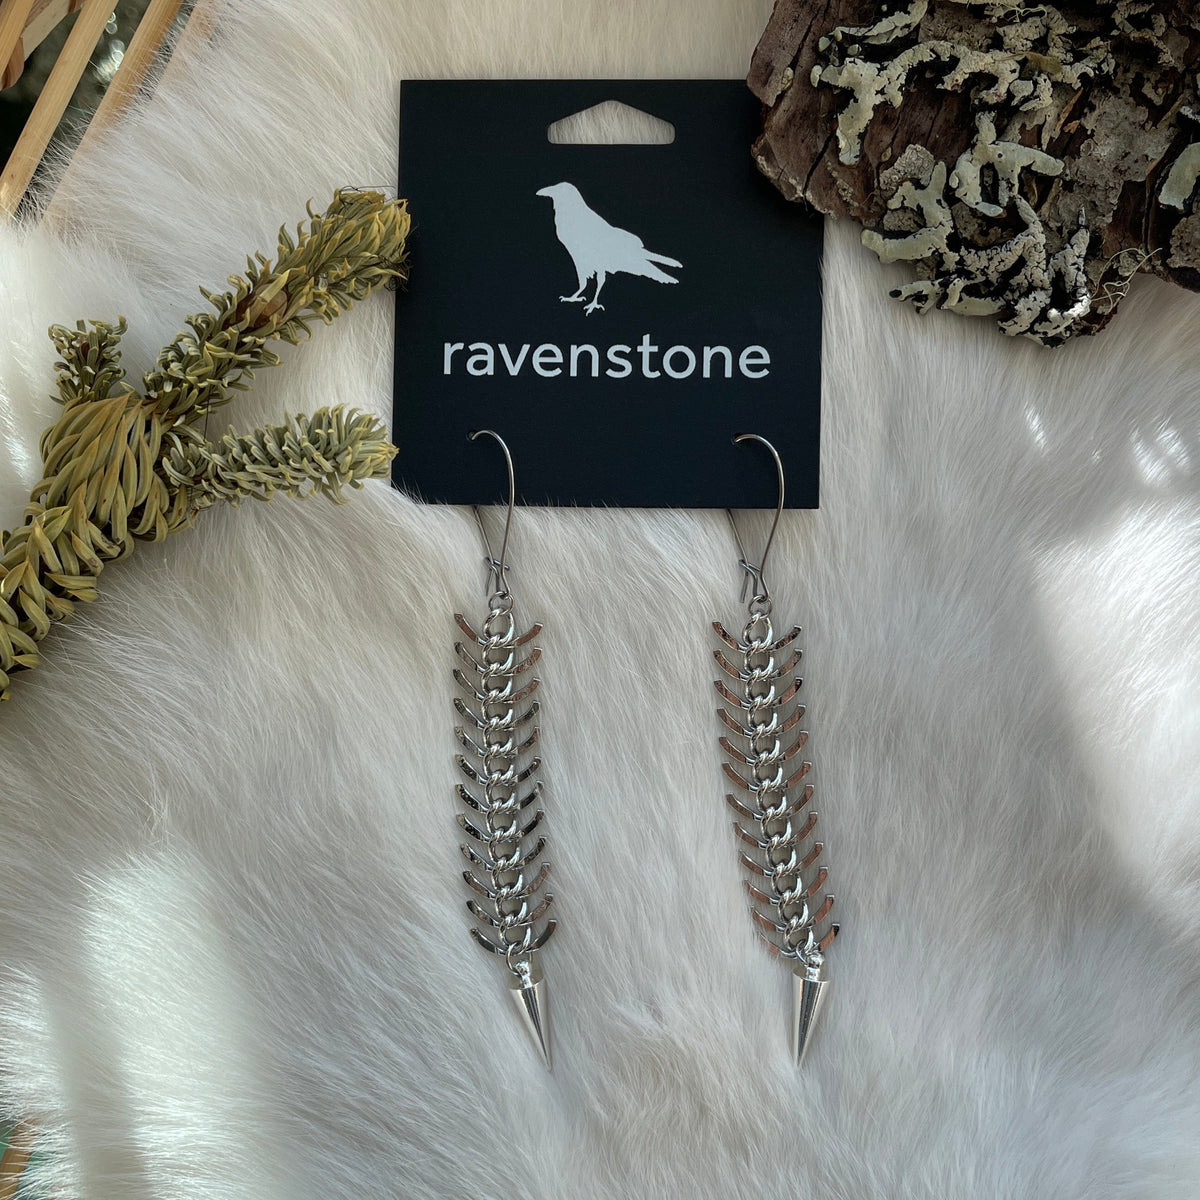 Ravenstone The Silver Spine and Spike Earrings